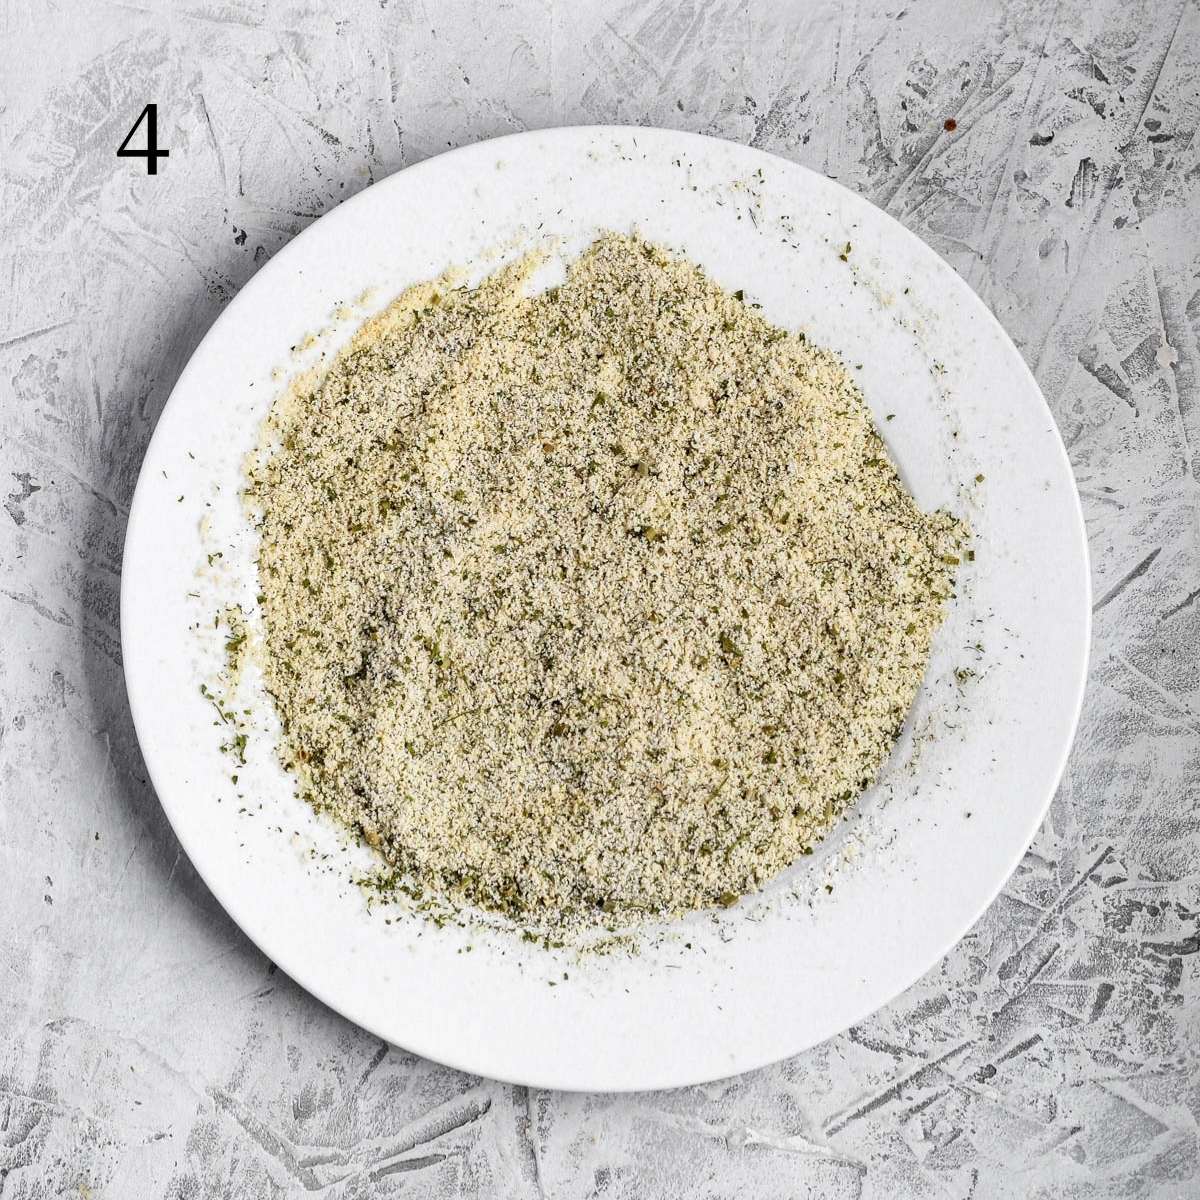 a plate with almond flour, parsley, garlic powder, onion powder, dill, chives, salt and pepper mixed together